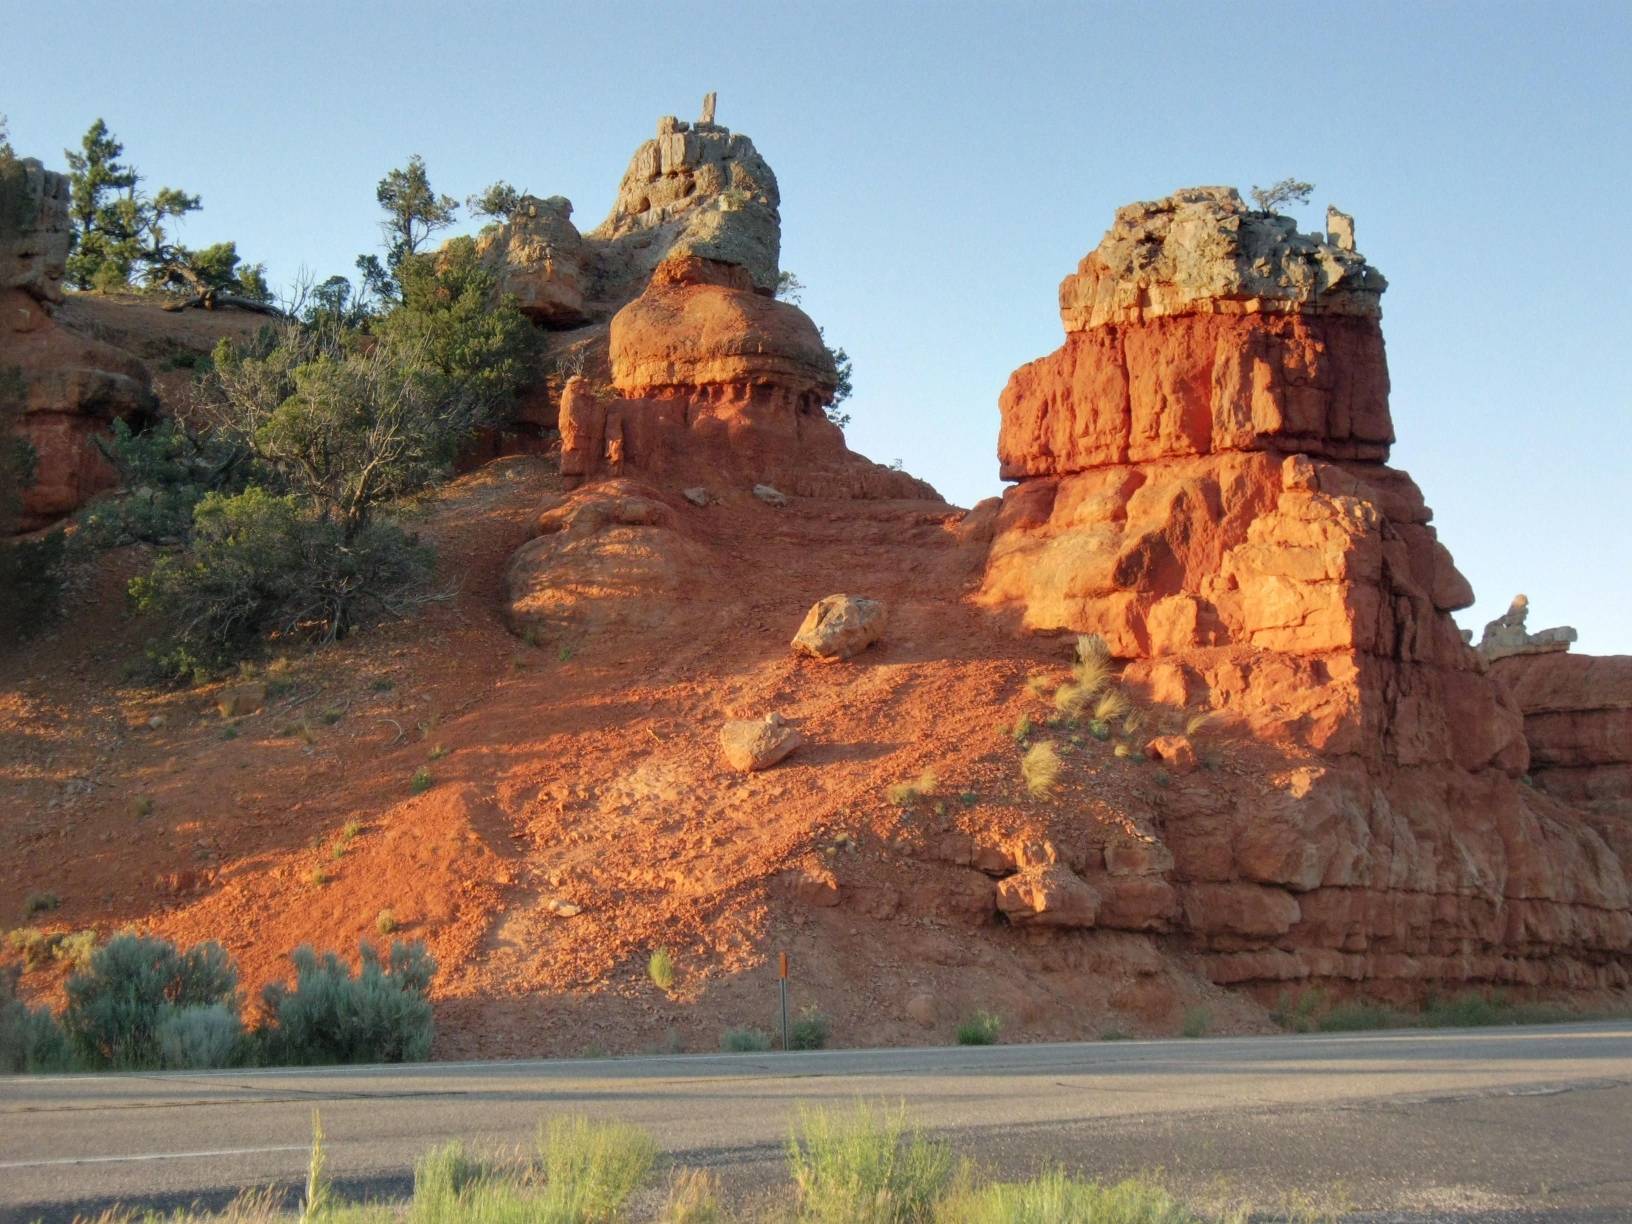 Image: The rock formations (hoodoos) in the Red Canyon at sunset